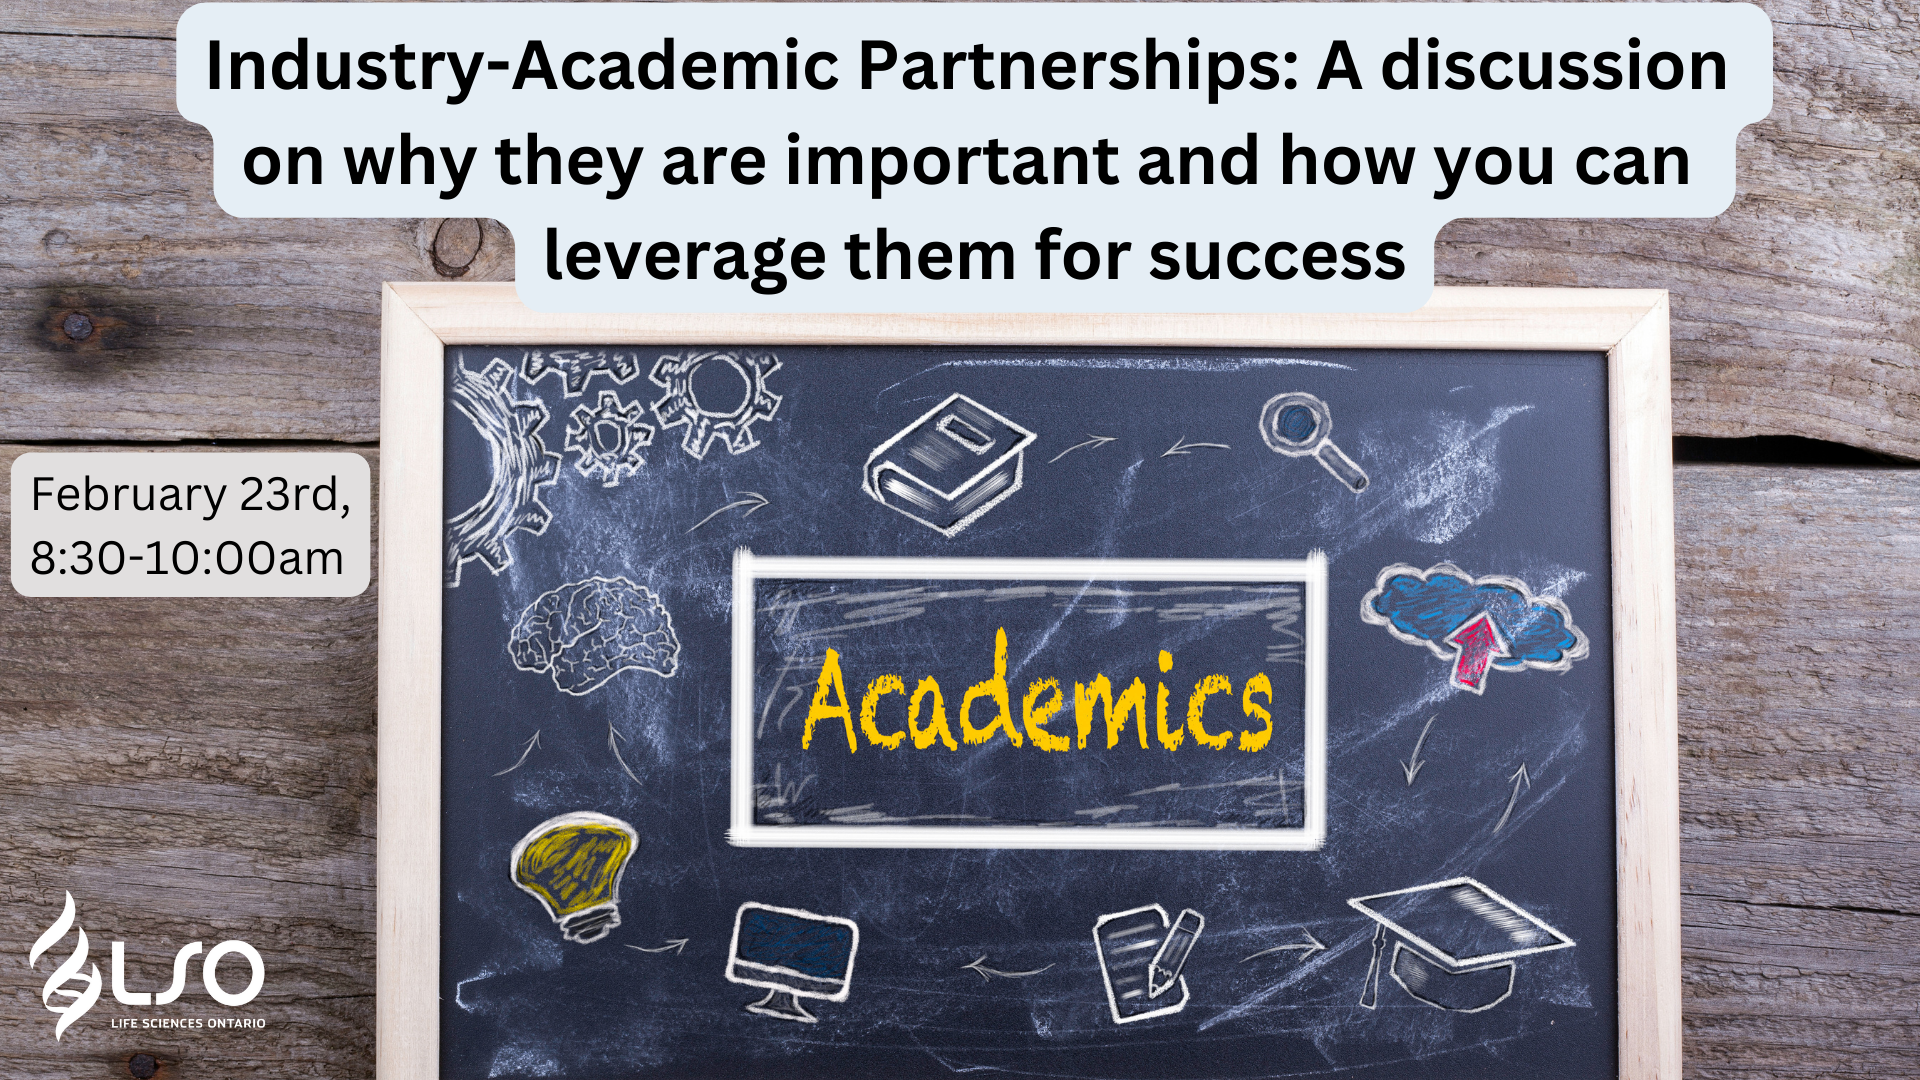 Industry-Academic Partnerships A discussion on why they are important and how you can leverage them for success